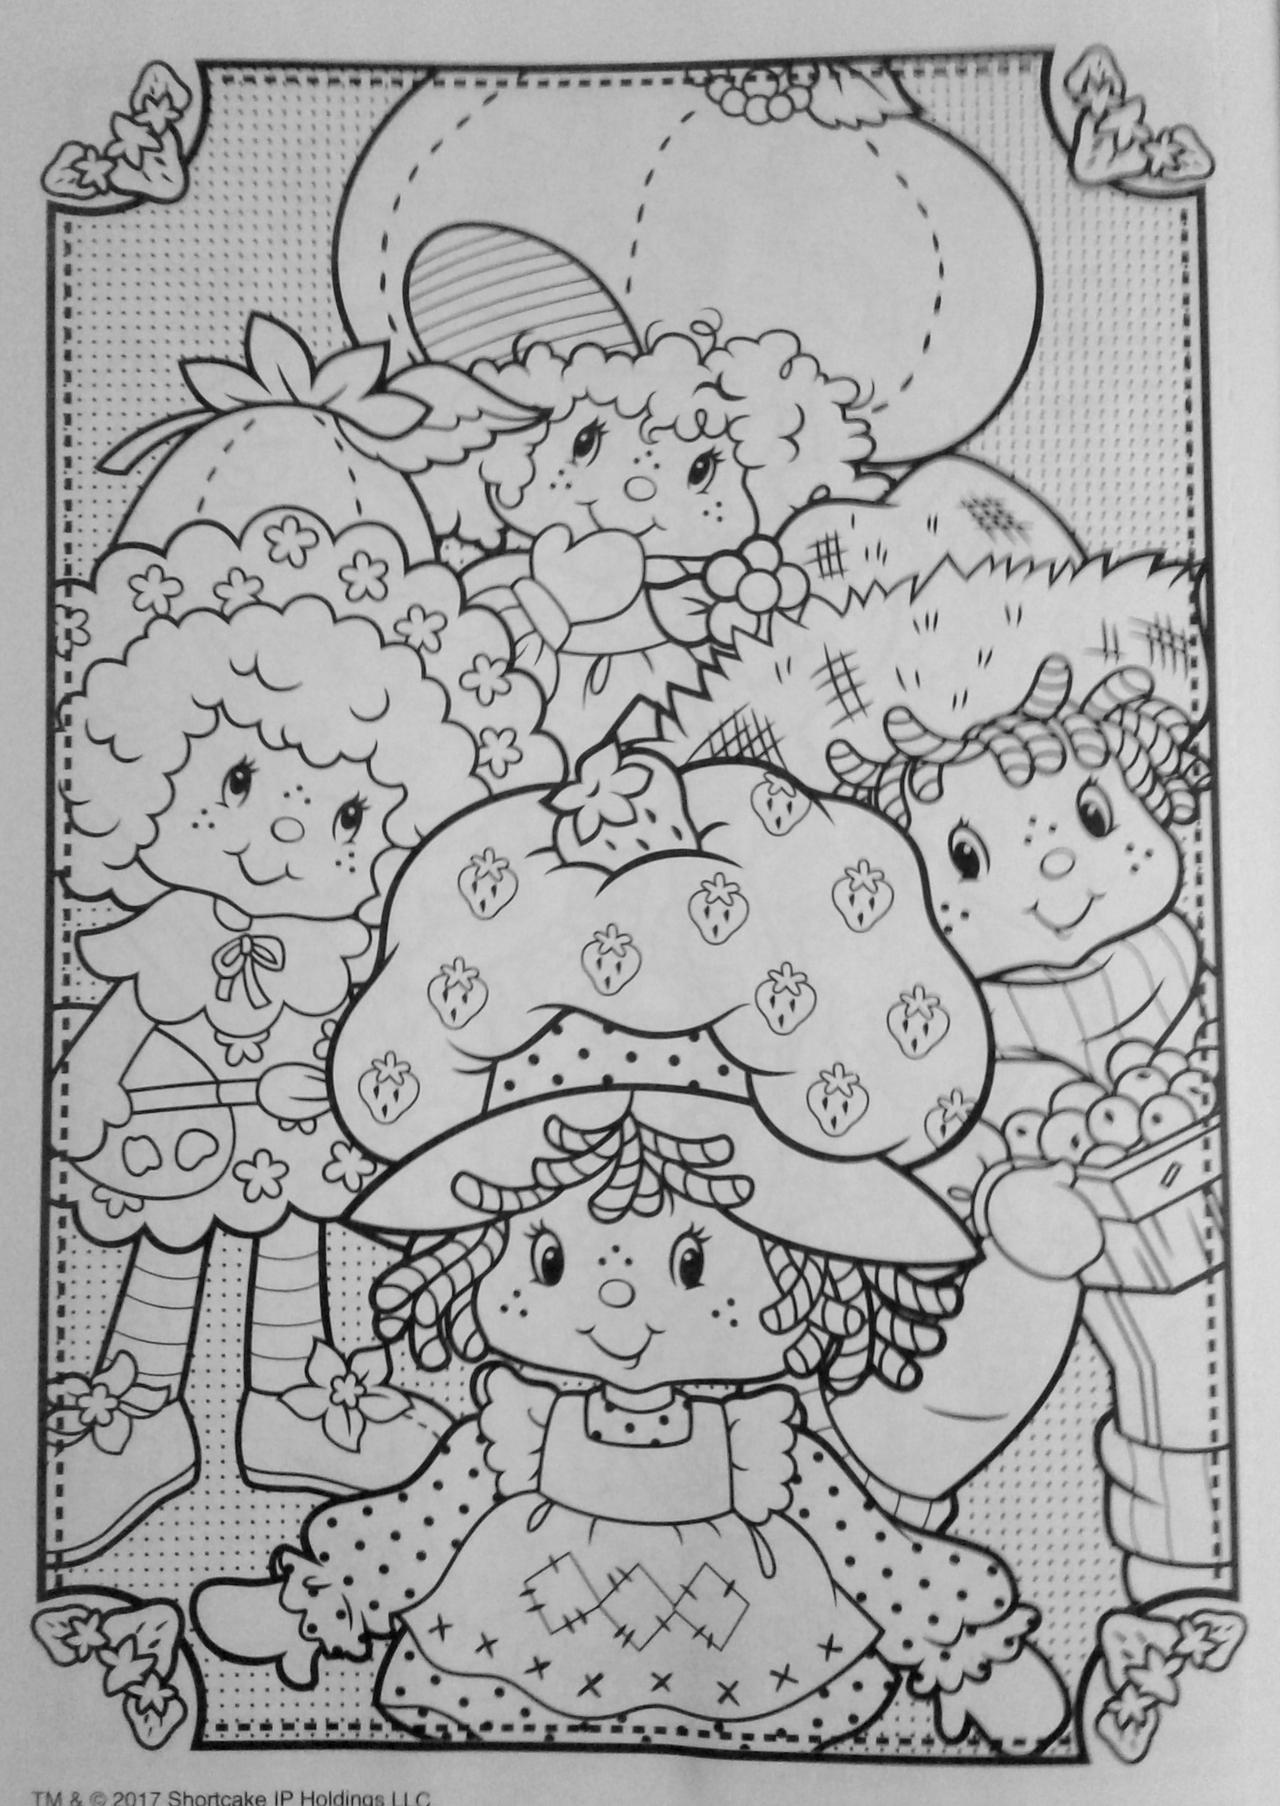 Strawberry shortcake coloring page by stacylyn on